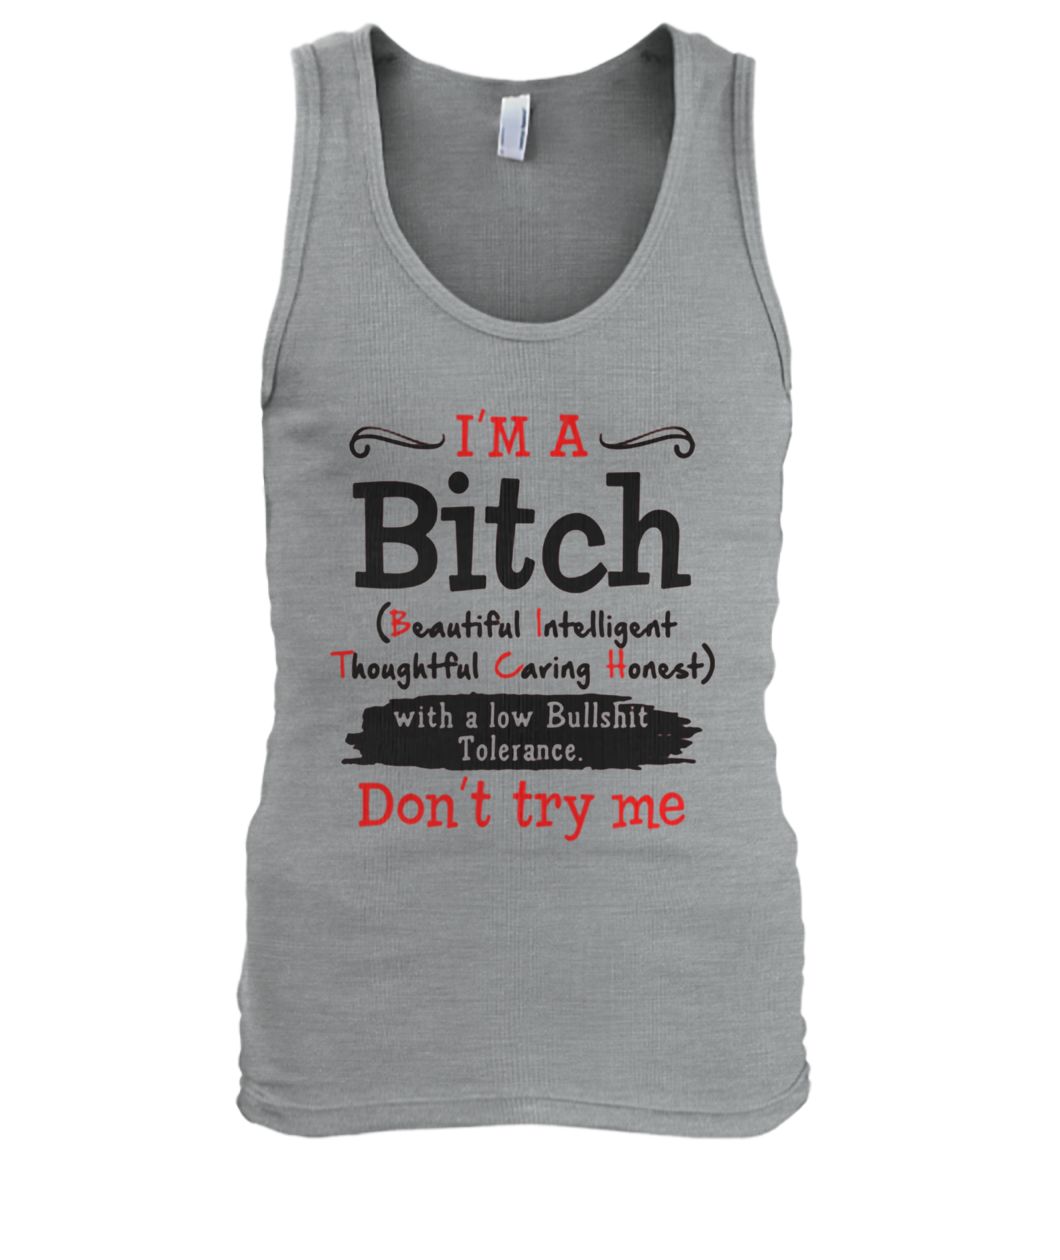 I'm a bitch beautiful intelligent thoughtful caring honest don't try me men's tank top